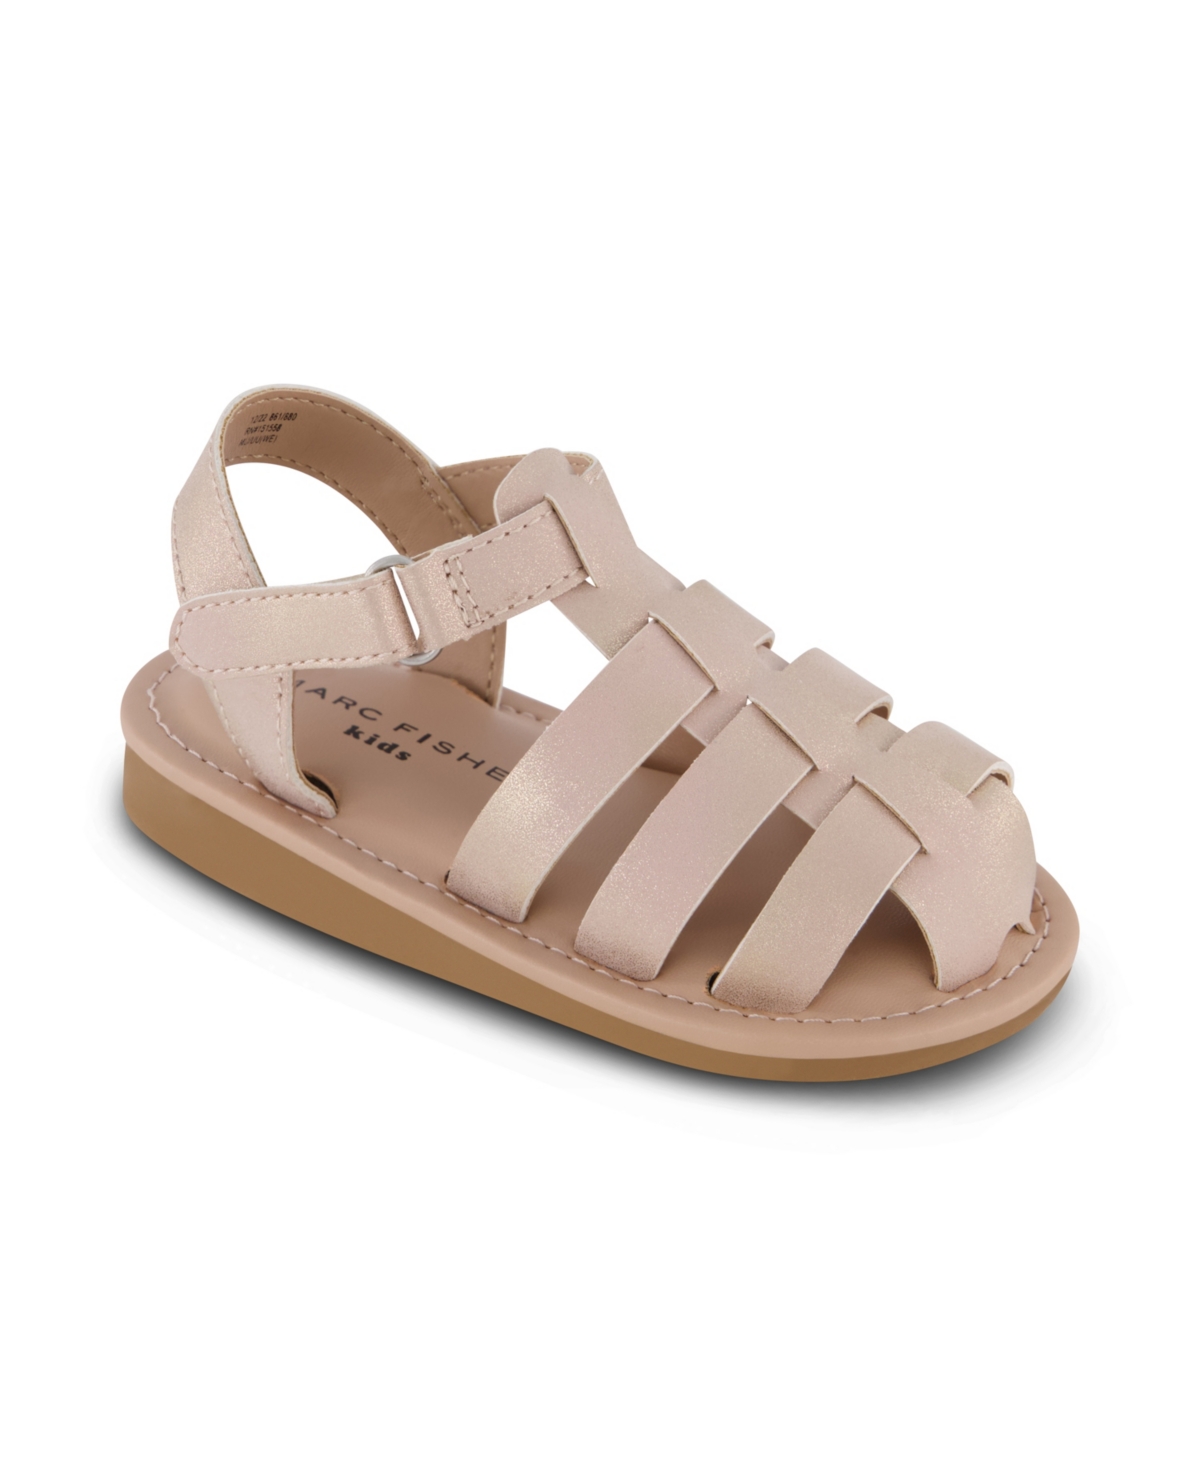 Marc Fisher Toddler Girls Closed Toe Sandals In Tan